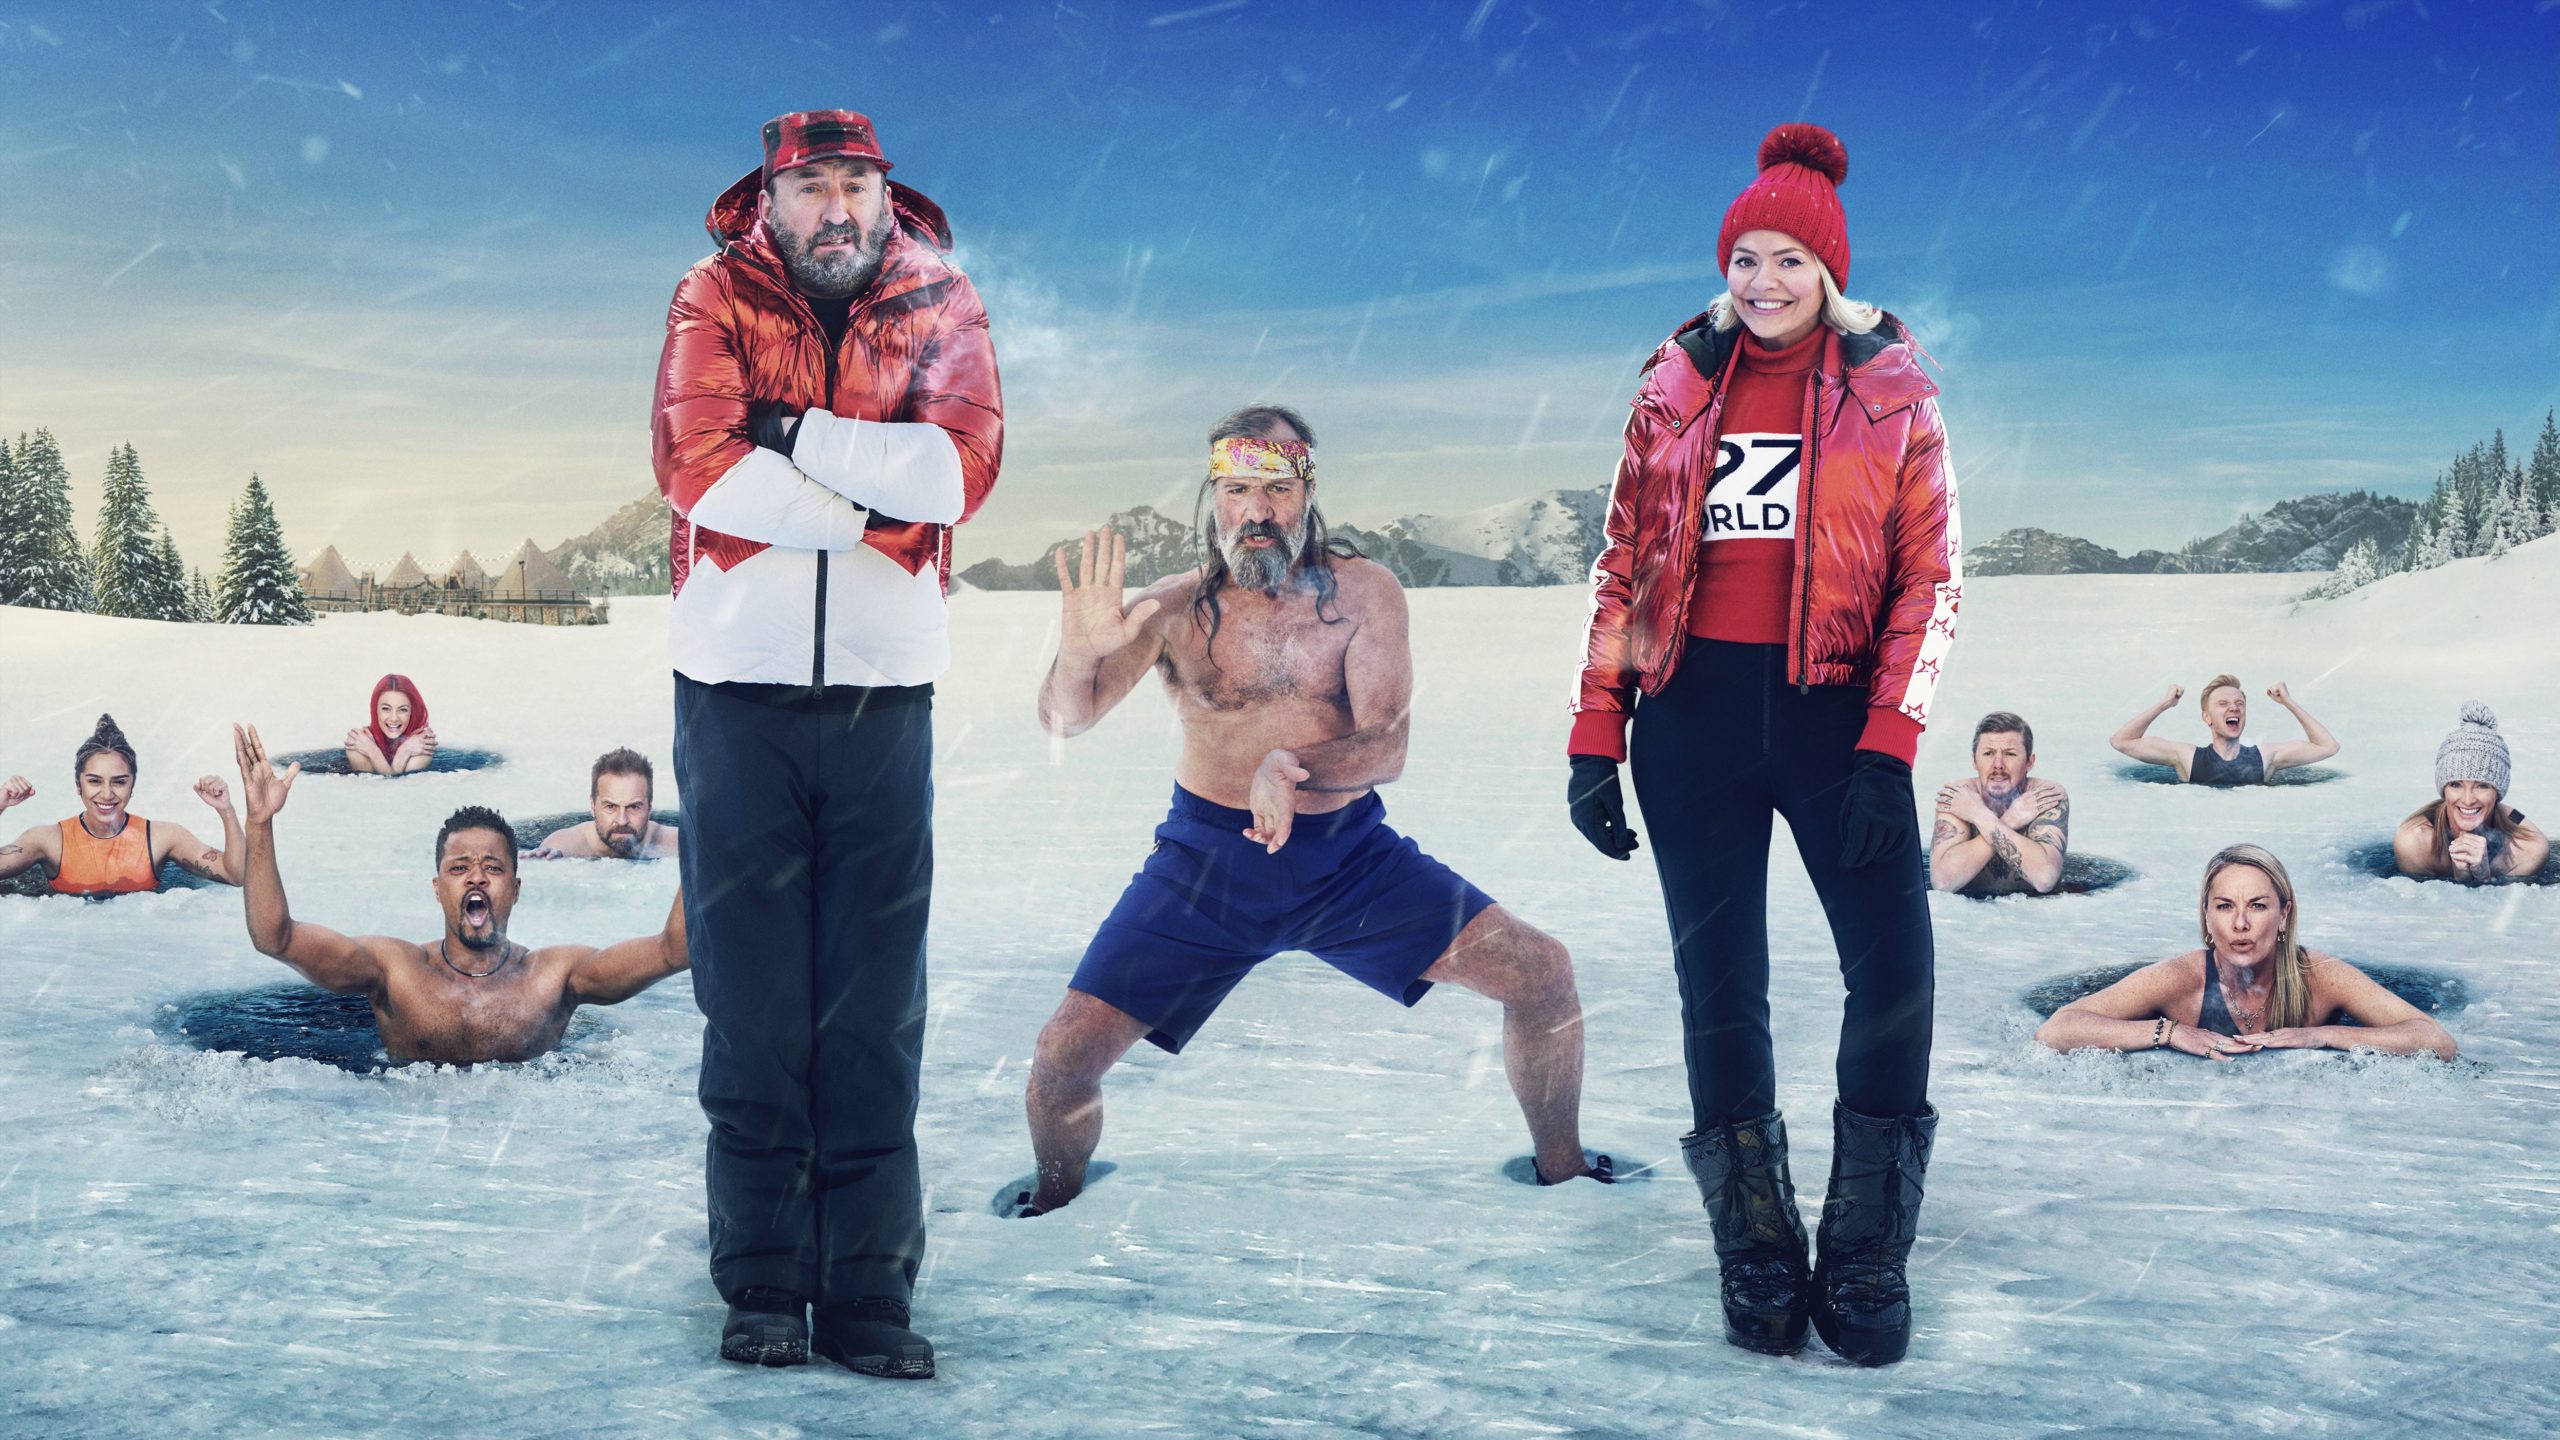 5 things we can learn from Freeze the Fear with Wim Hof - The Big Issue